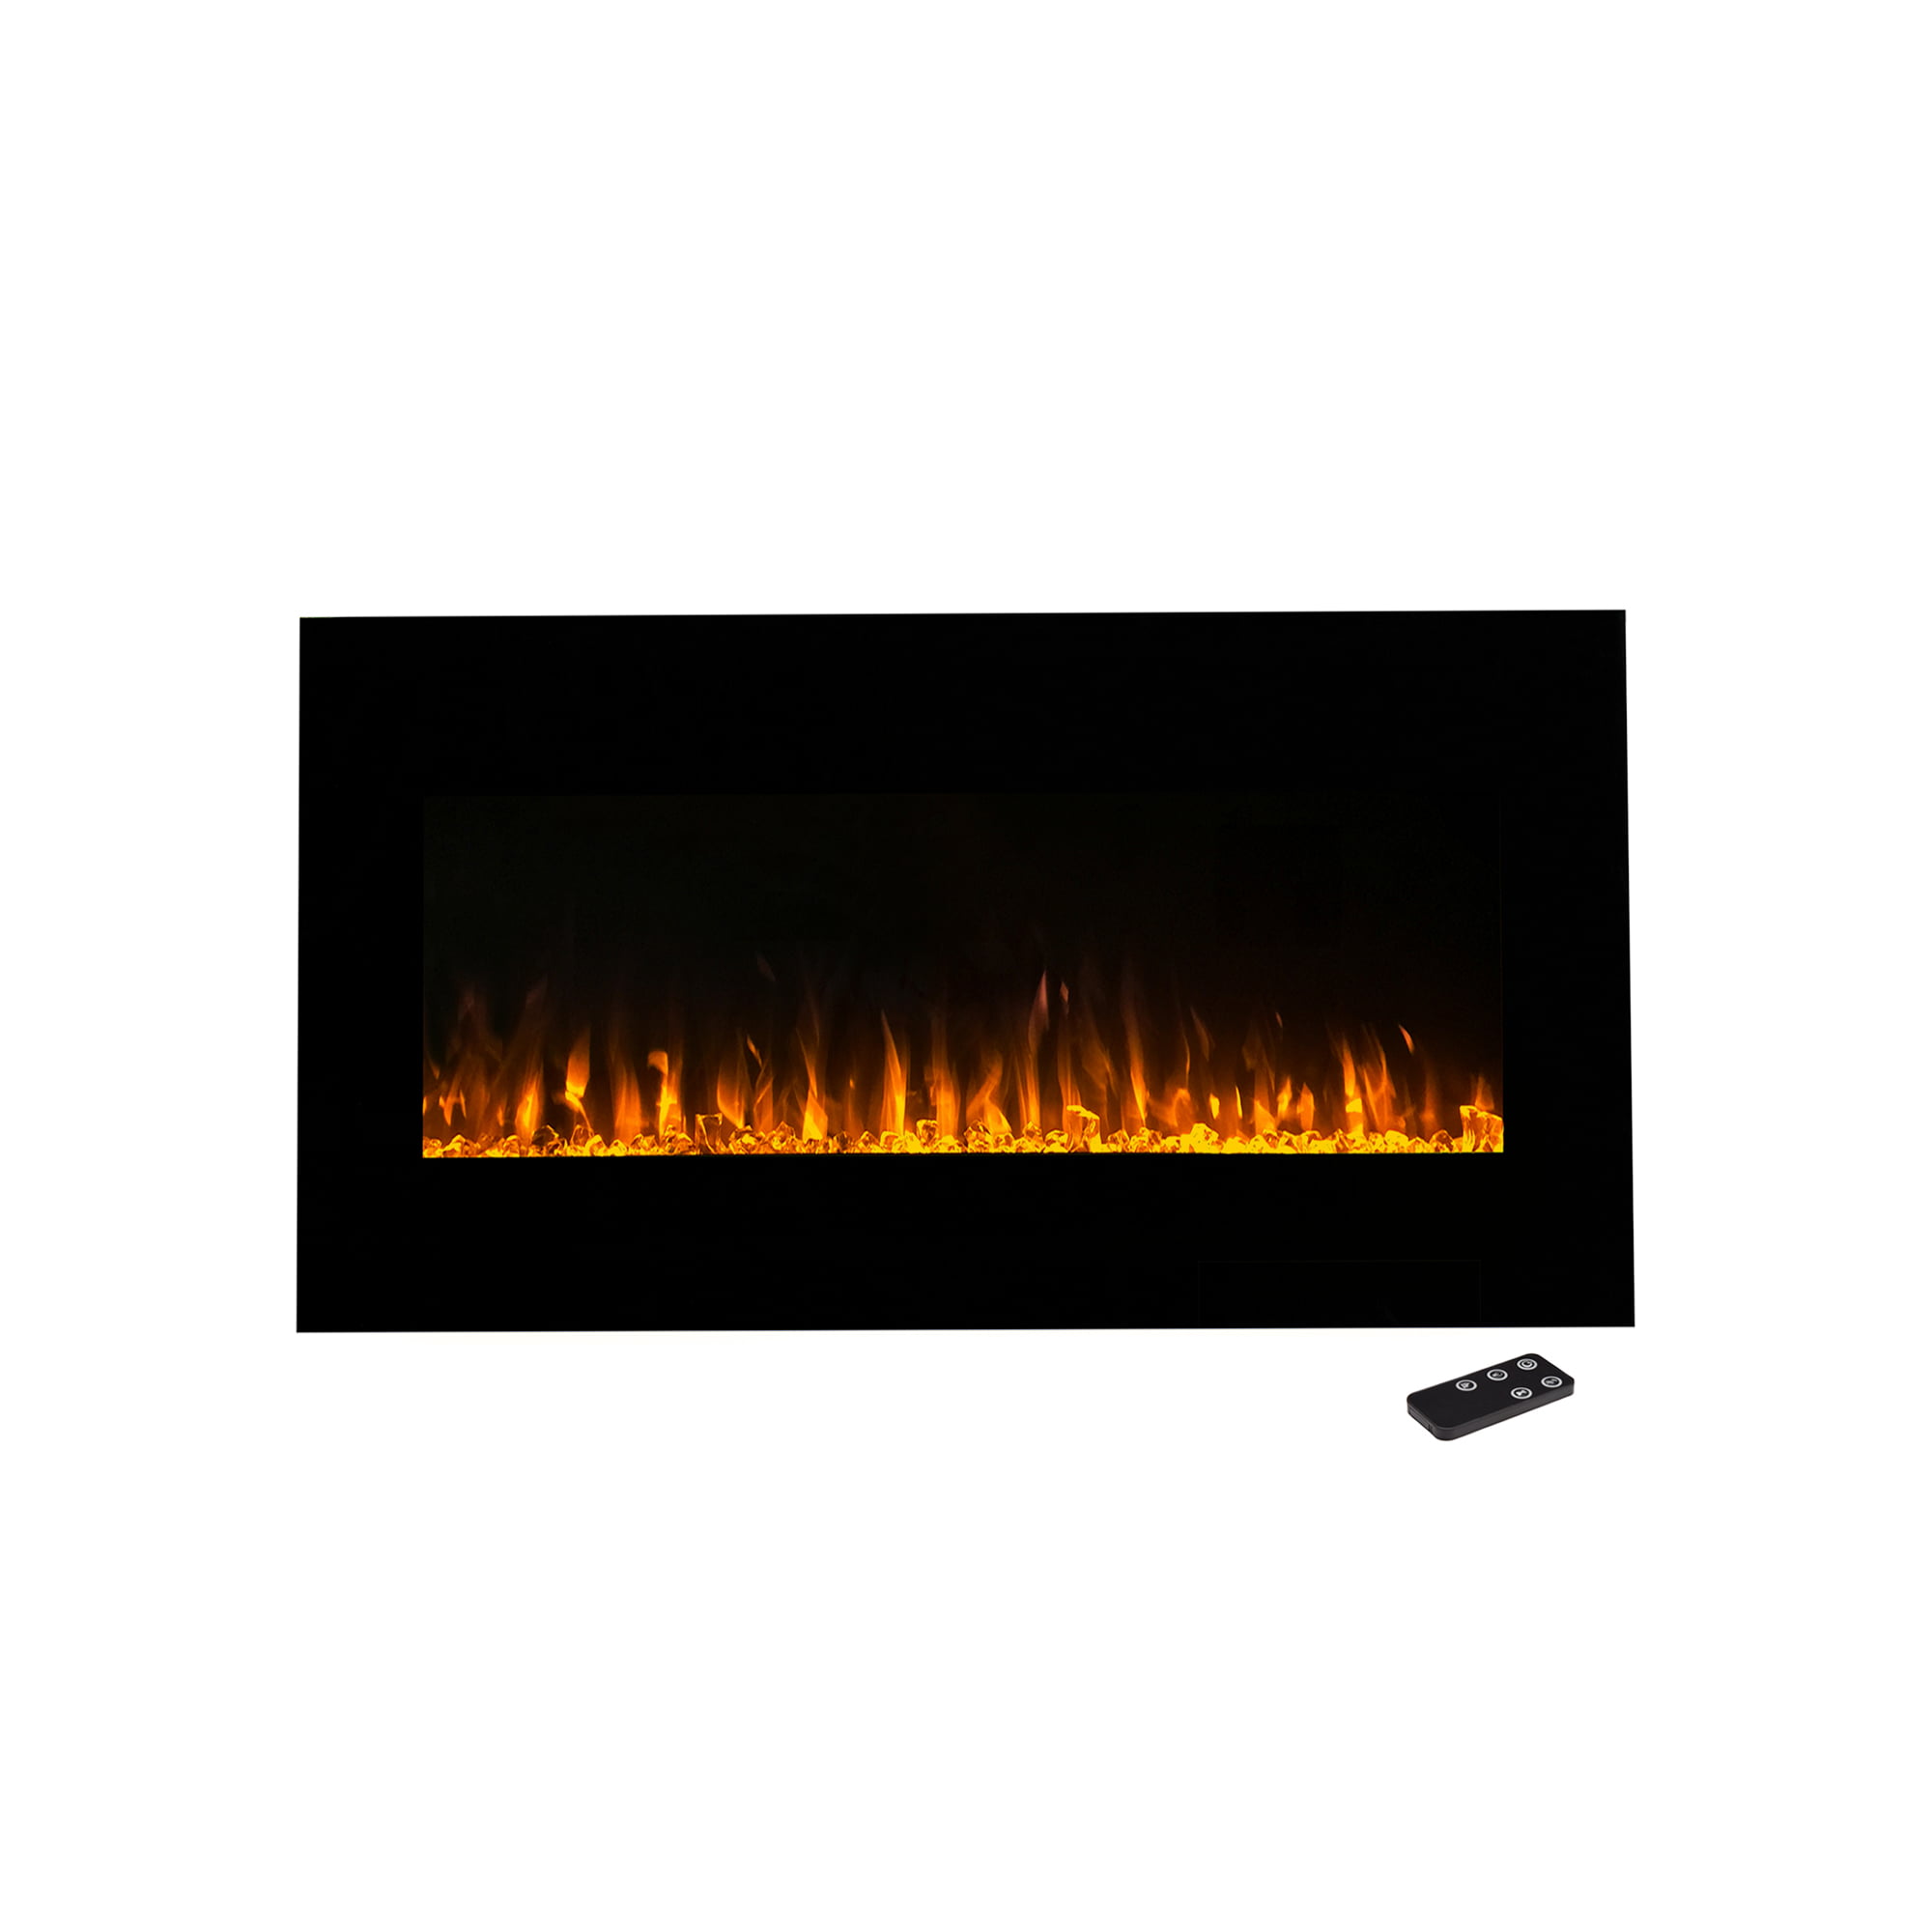 42 Inch Electric Wall Mounted Fireplace, Northwest Electric Wall Mounted Fireplace With Led Flame And Remote